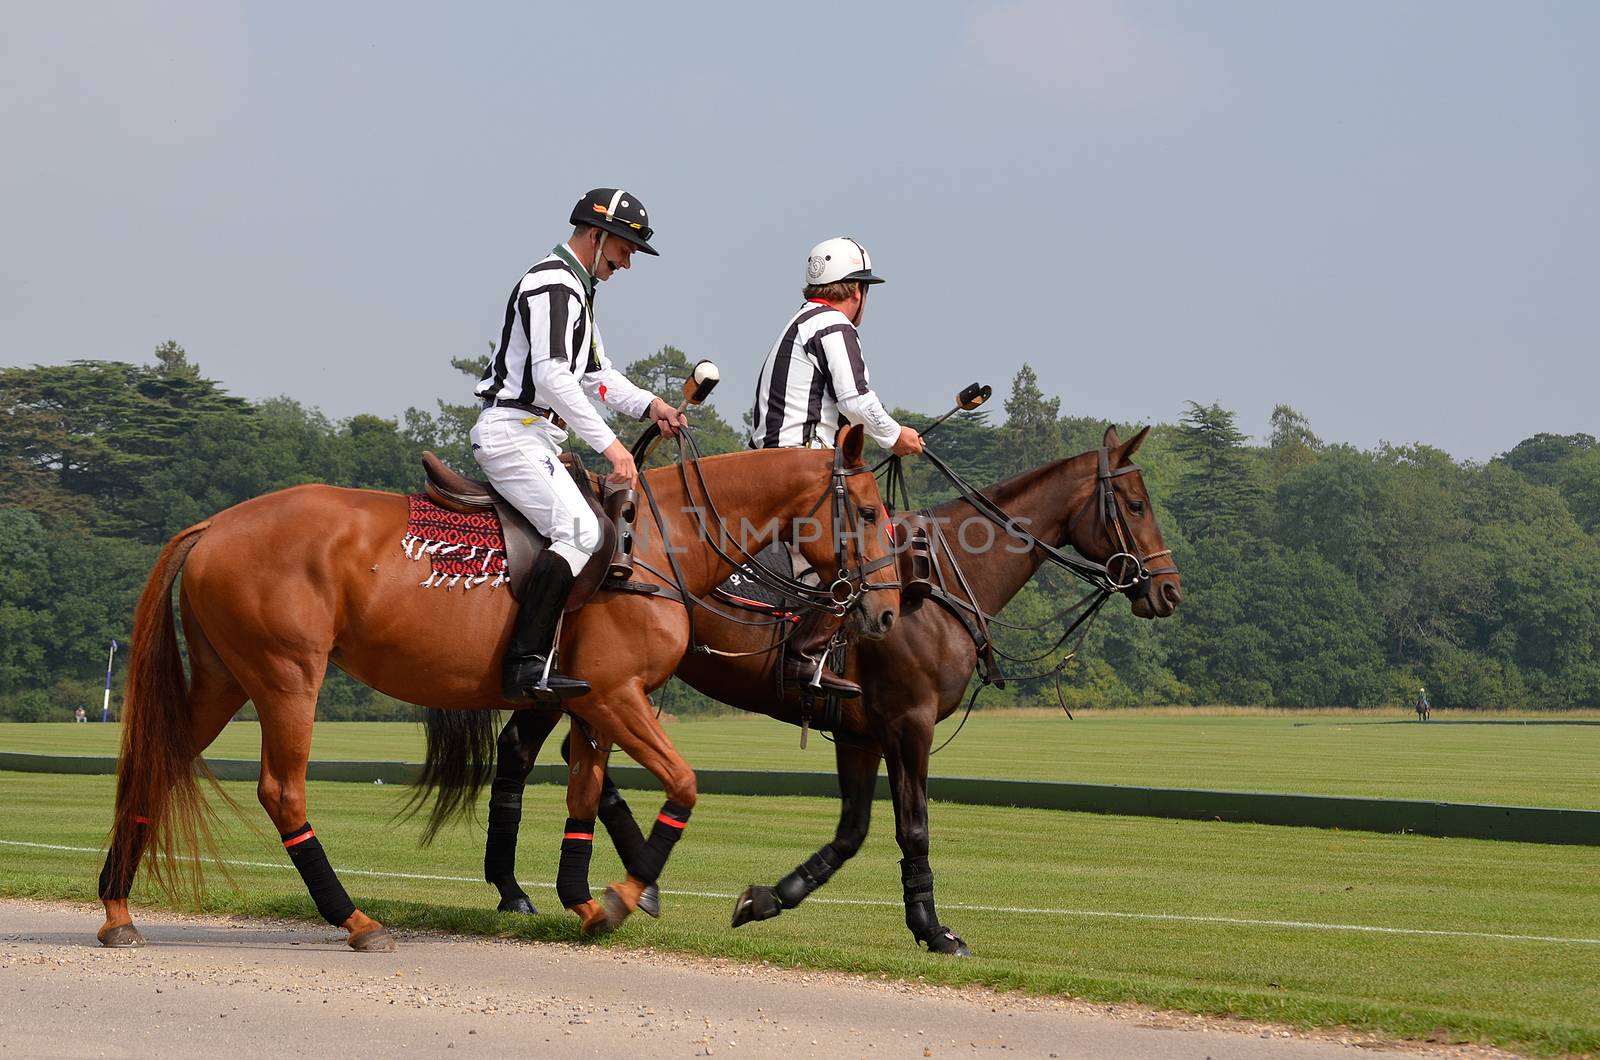 CIRENCESTER, UK – AUGUST 25: Two horse polo umpires on their horses at the Cirencester Park Polo Club in Cirencester, UK on August 25, 2013.